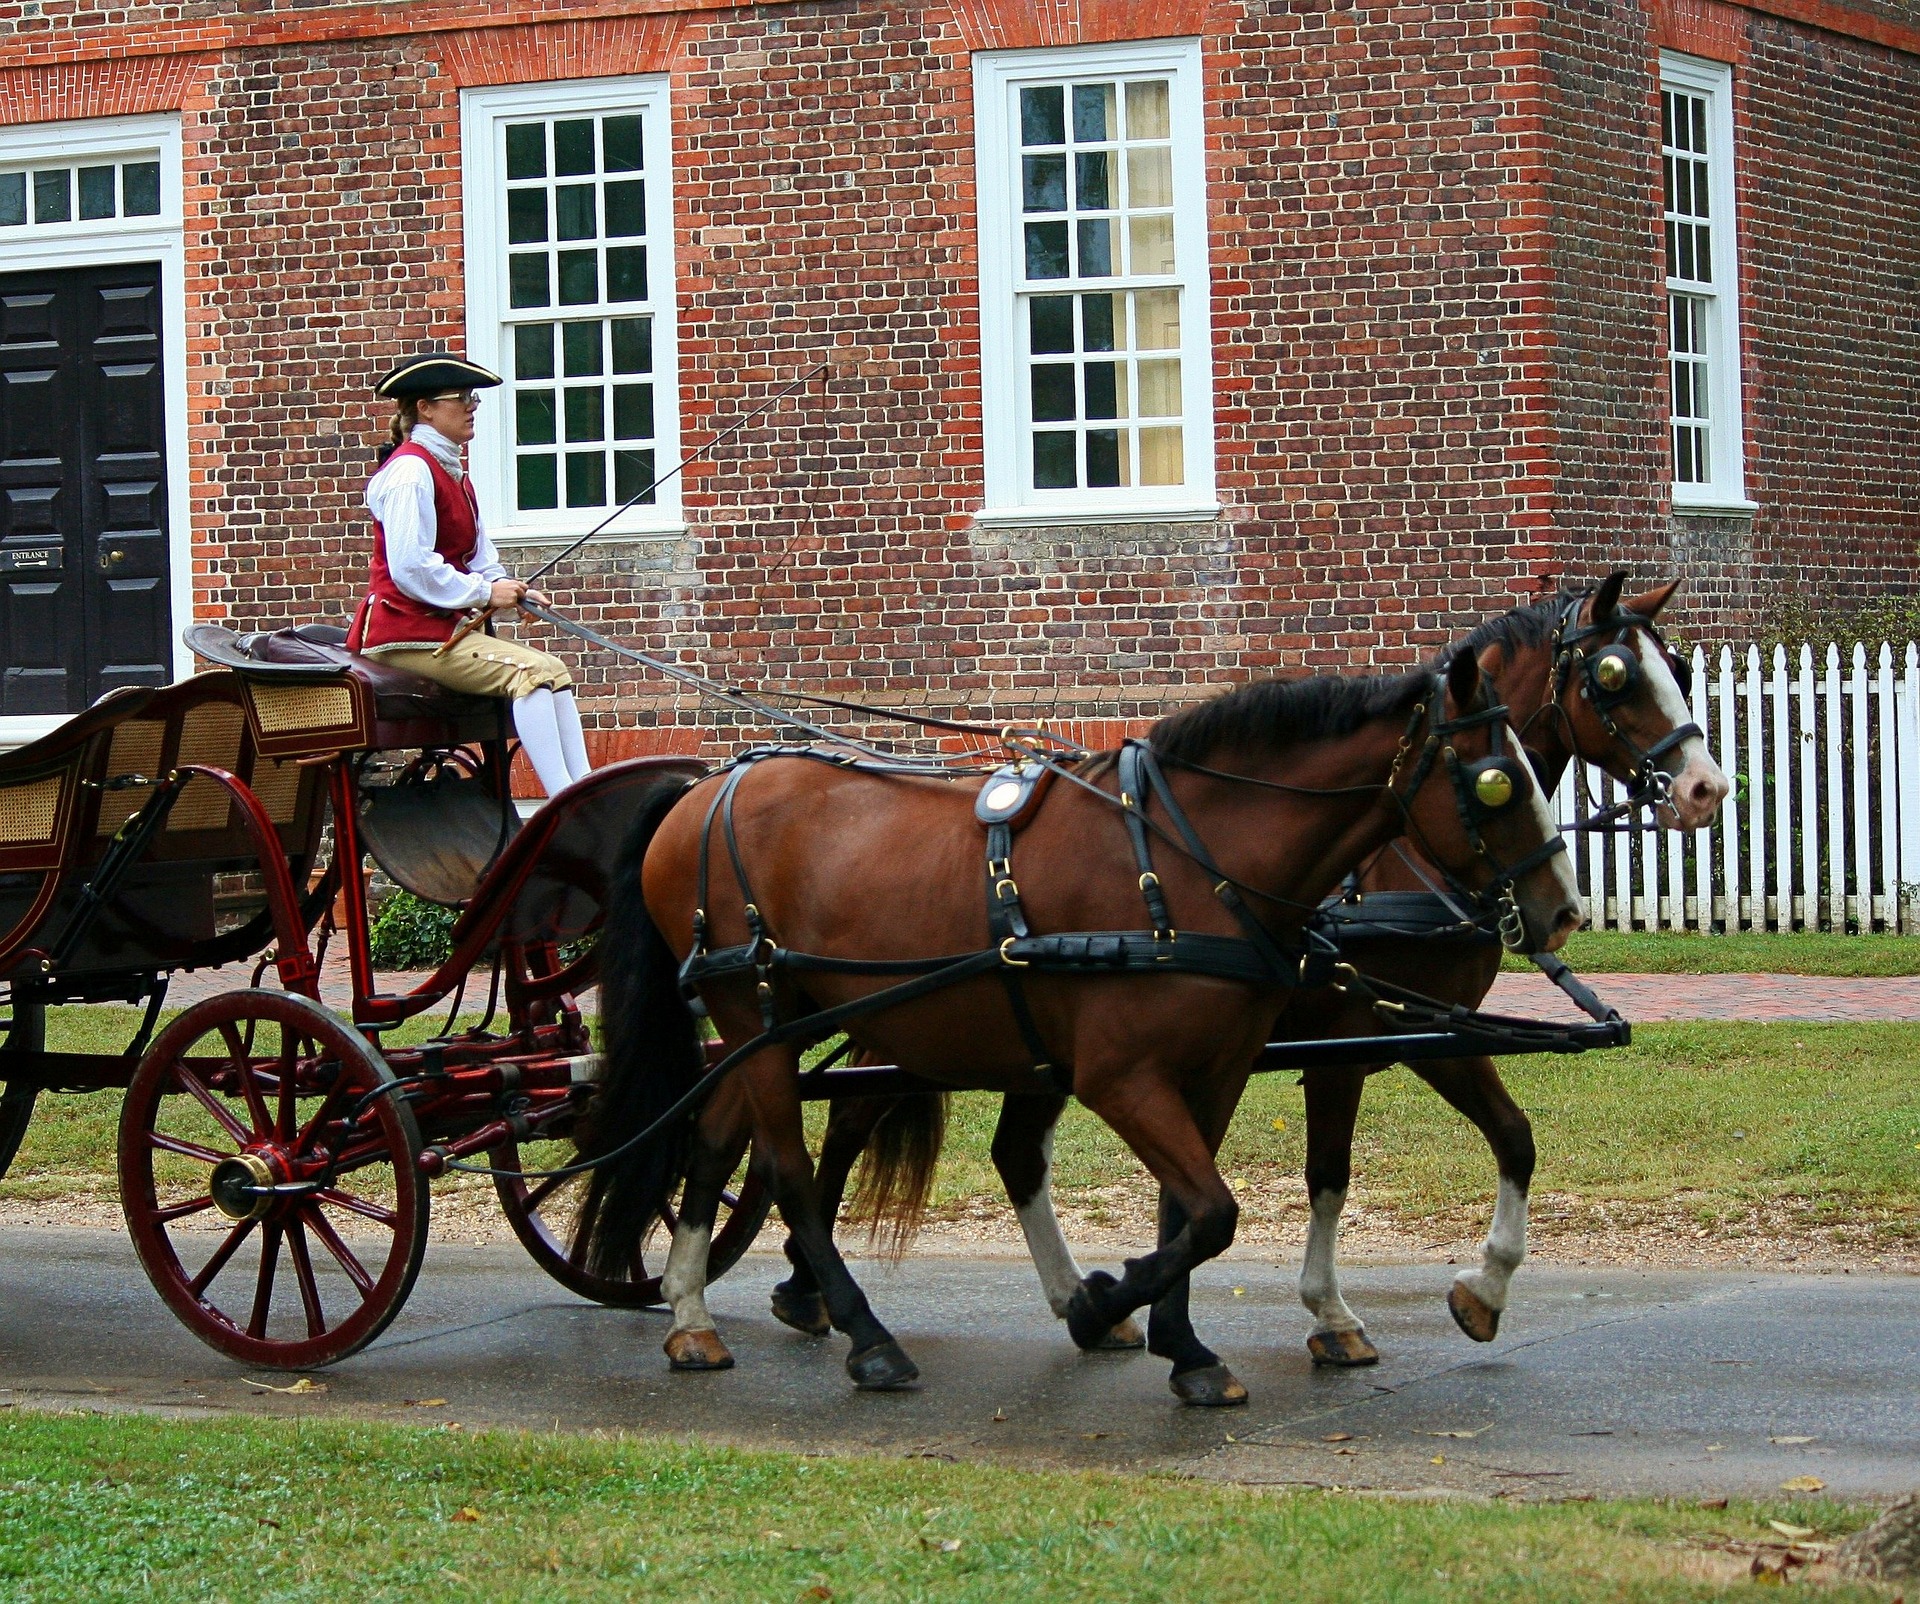 Horse carriage in Colonial Williamsburg.